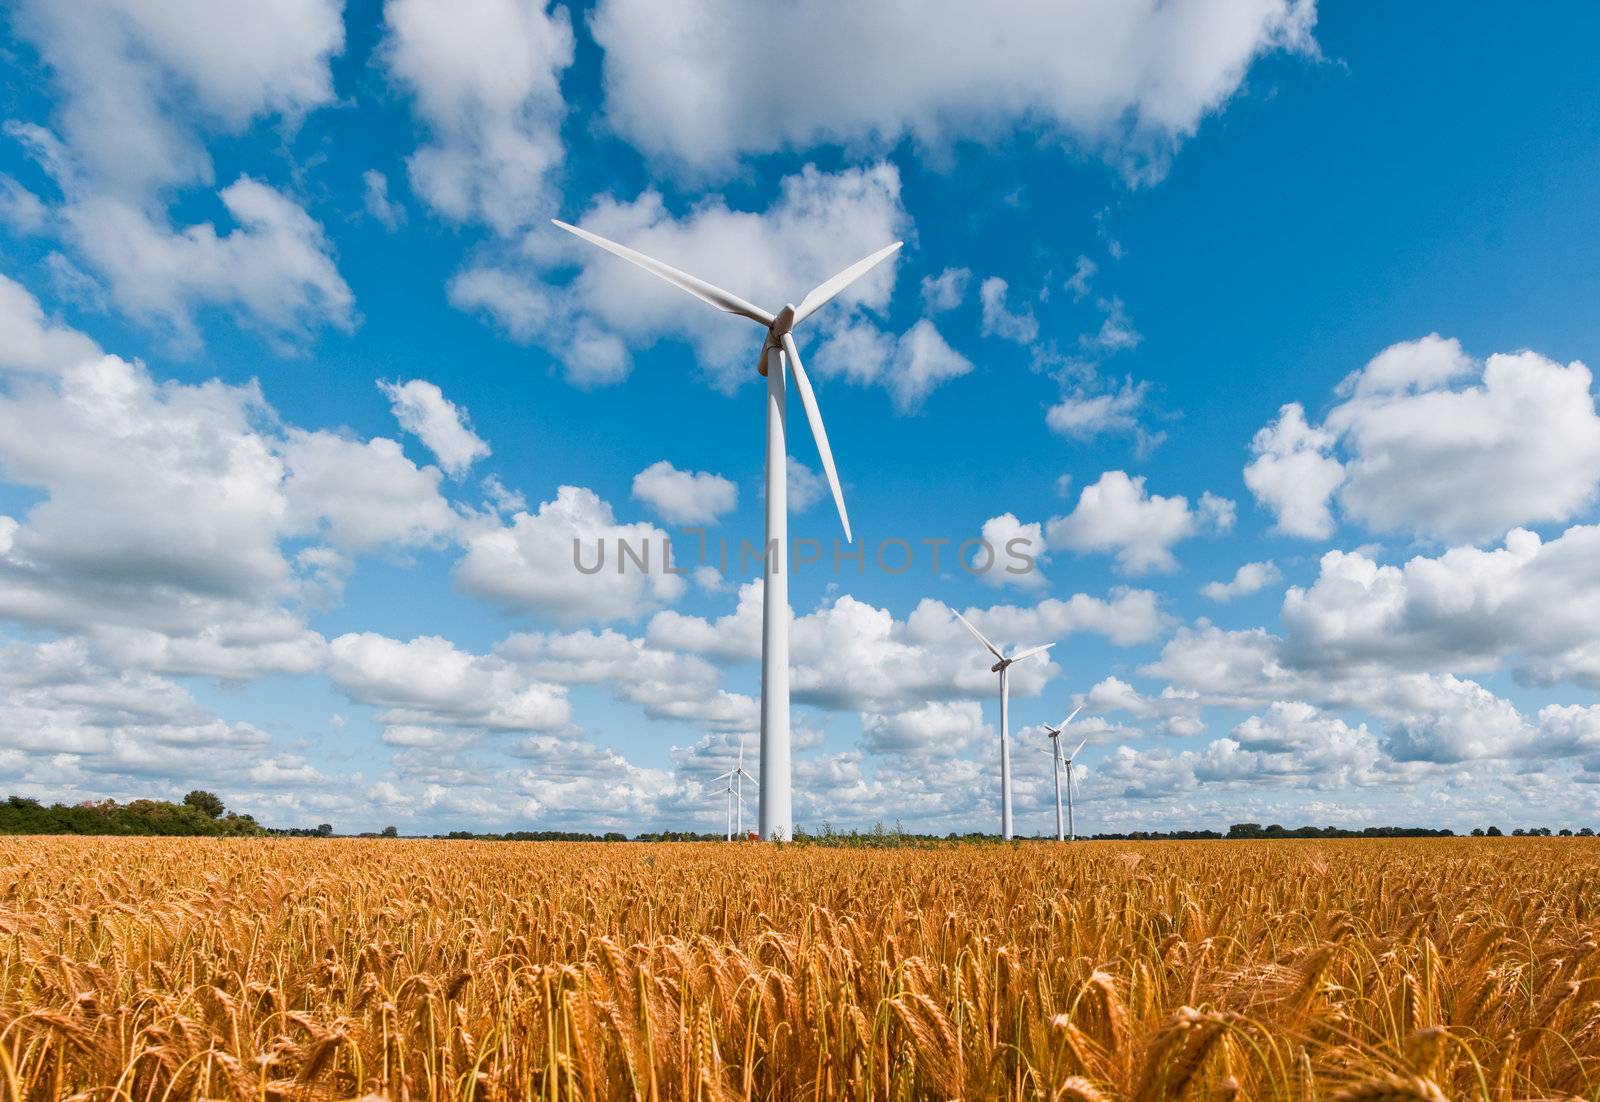 wind turbines in rural area on a wheat field in front of a beautiful sky